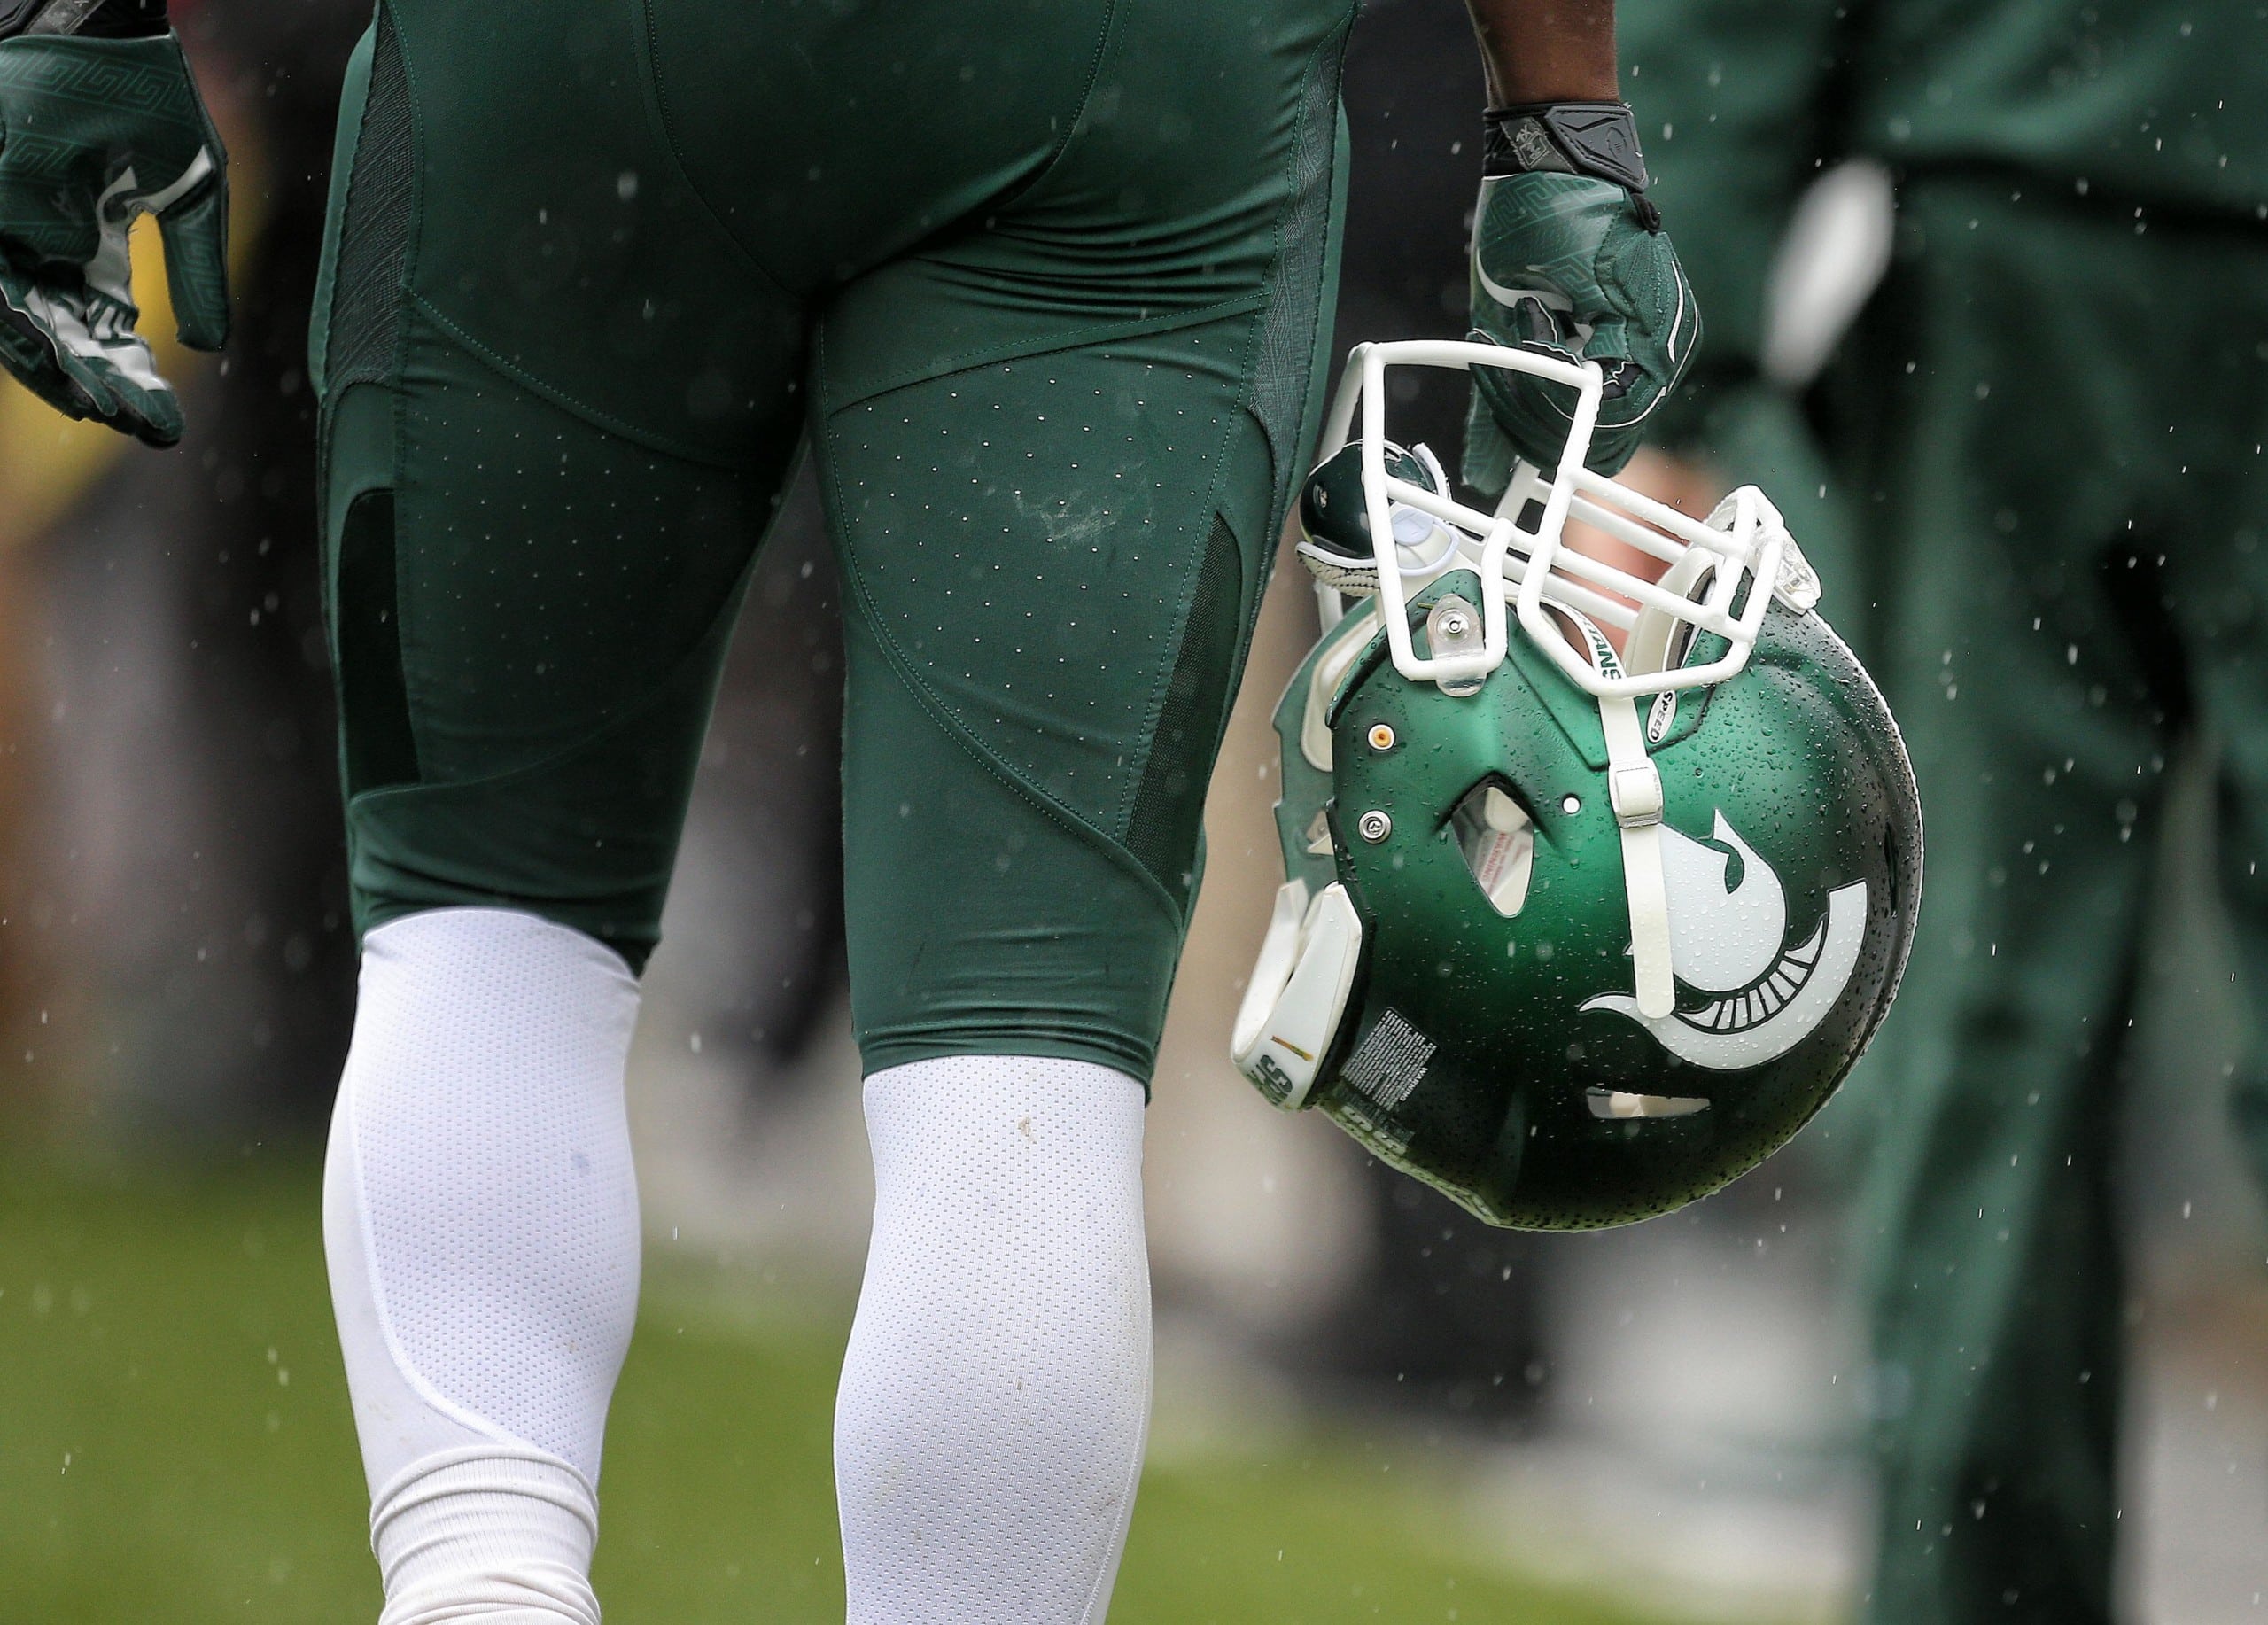 Photo of Michigan State football player holding helmet at knee-level